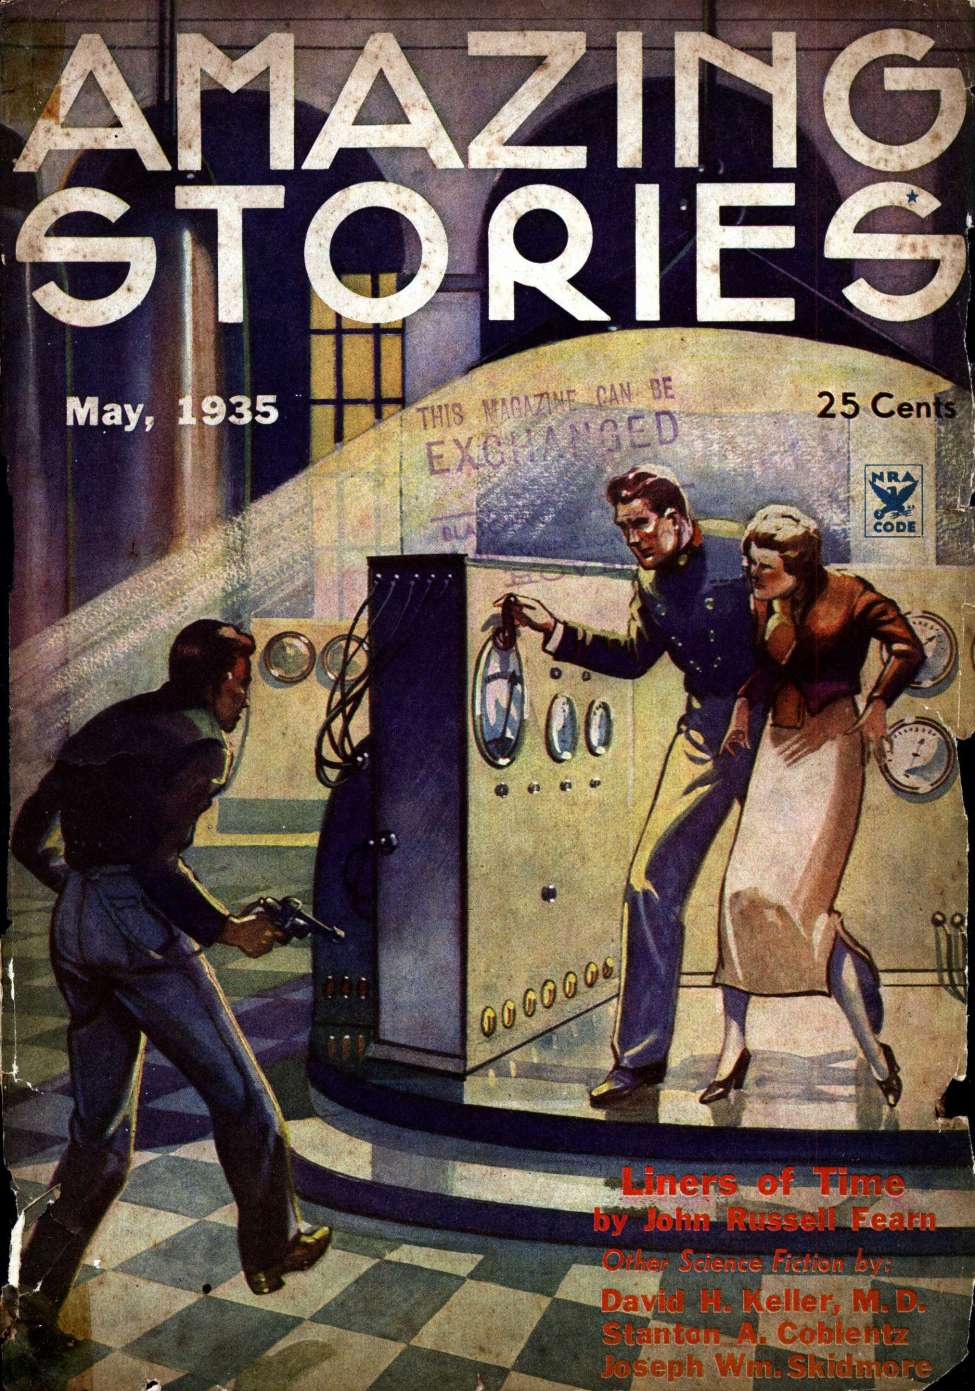 Book Cover For Amazing Stories v10 2 - Liners of Time - John Russell Fearn